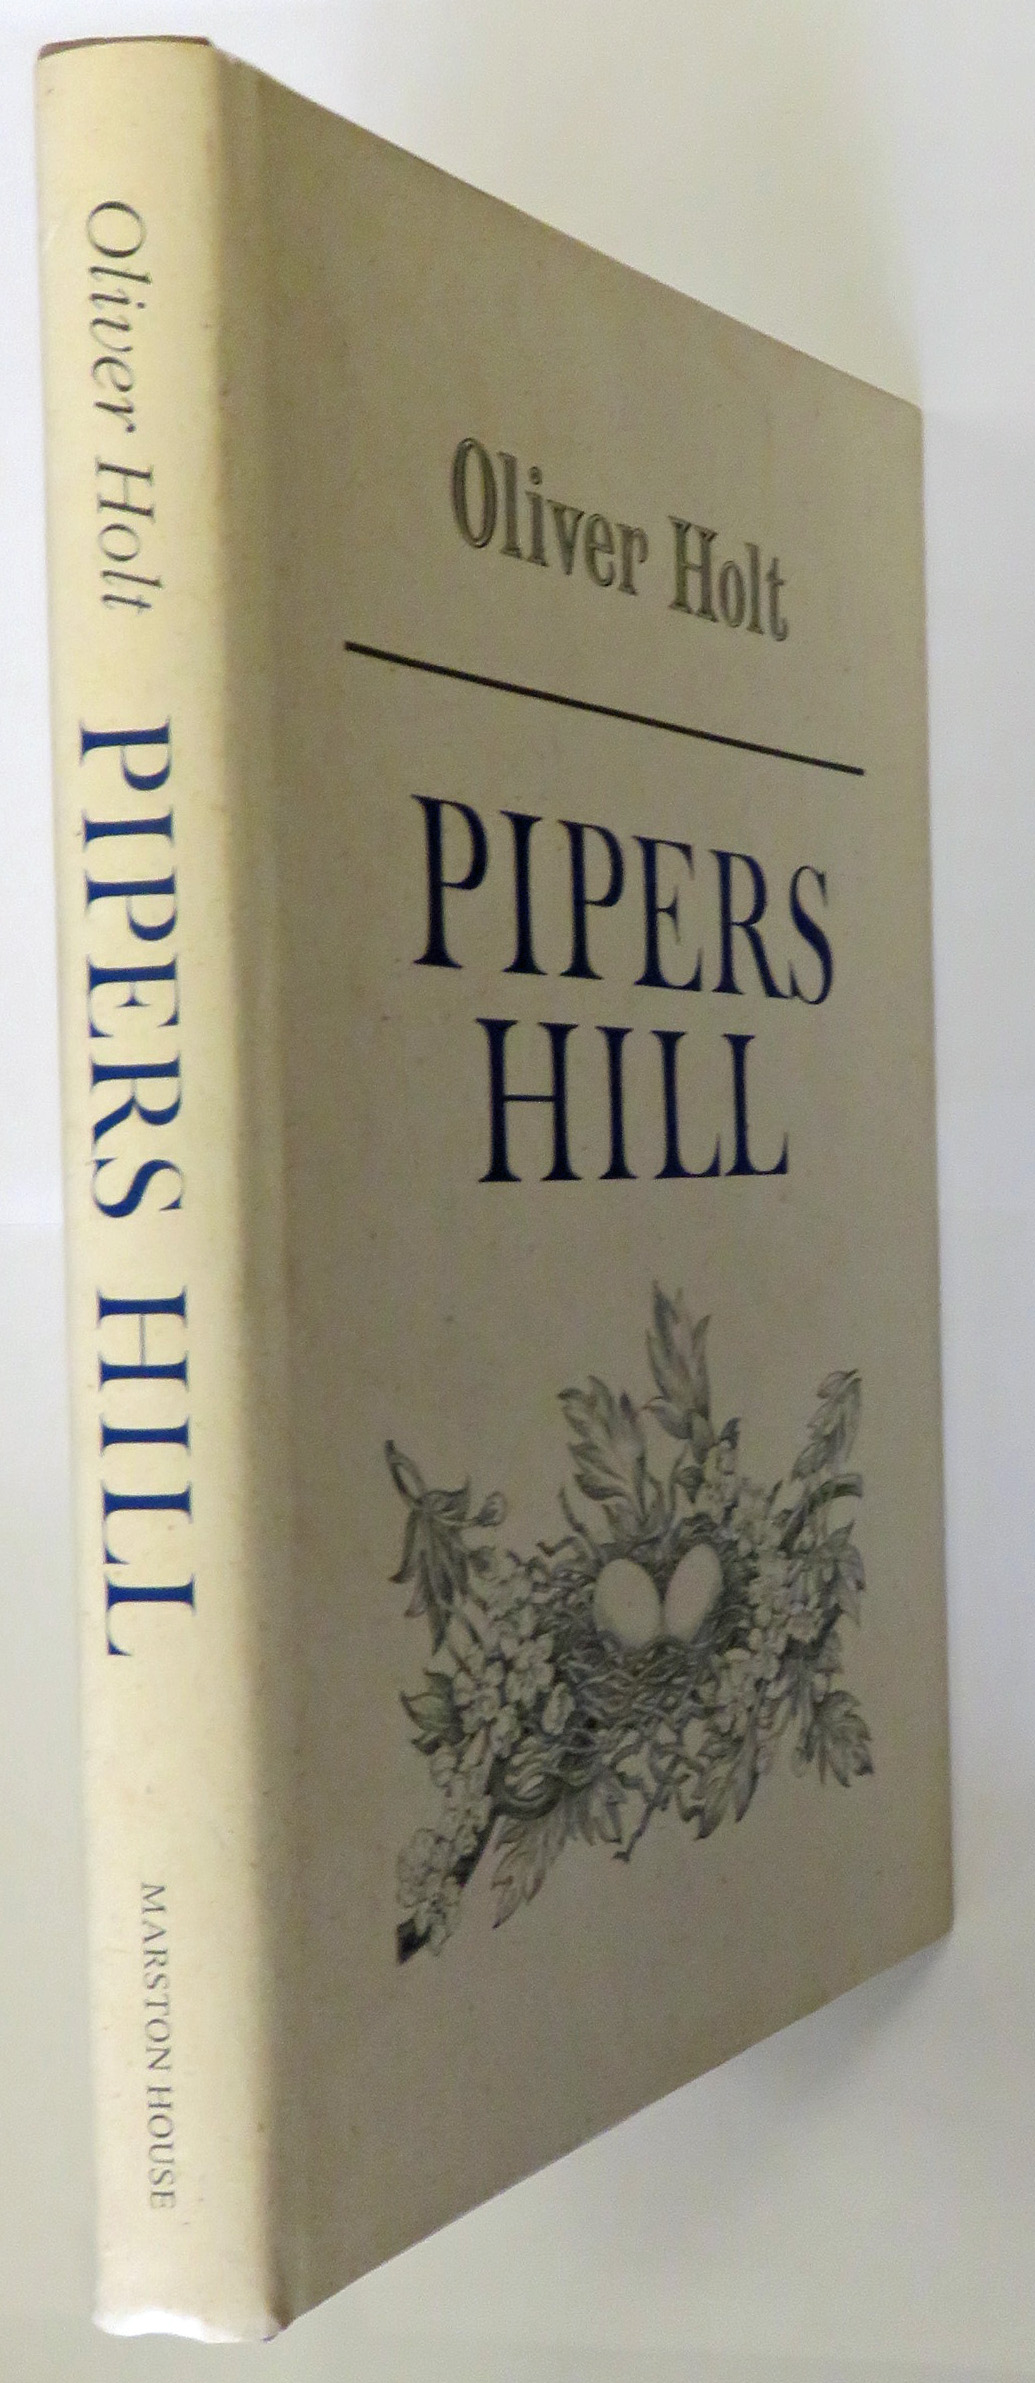 Pipers Hill Memories of a Country Childhood